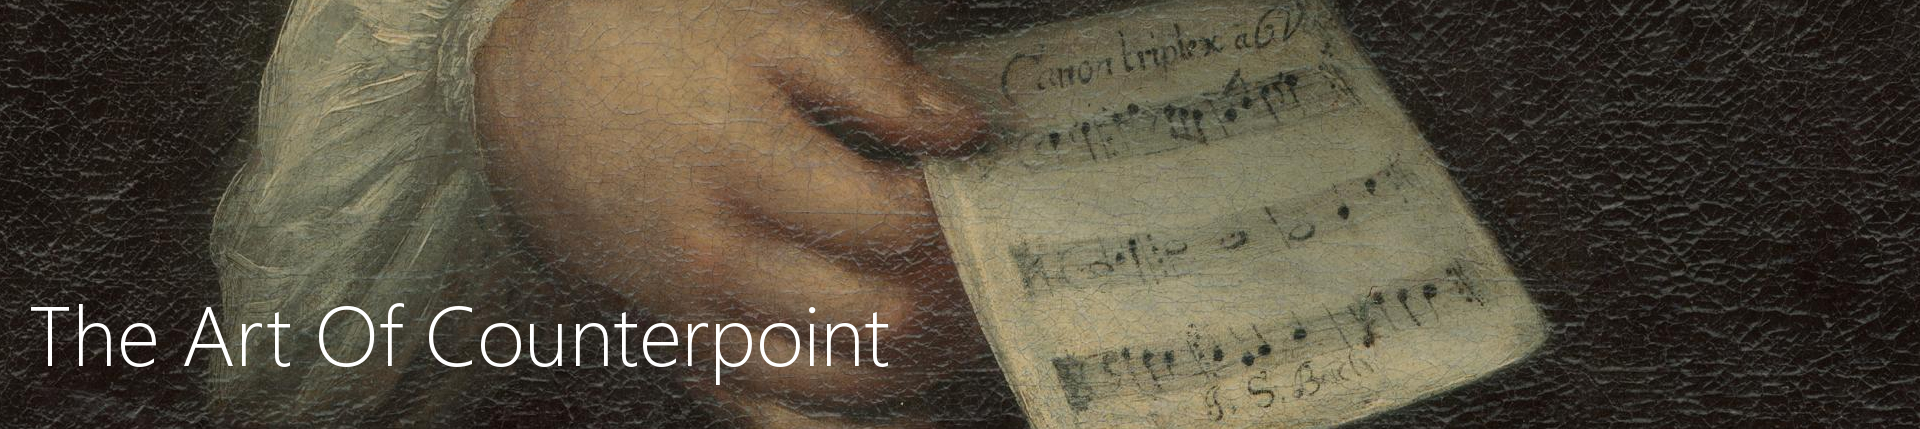 The Art Of Counterpoint